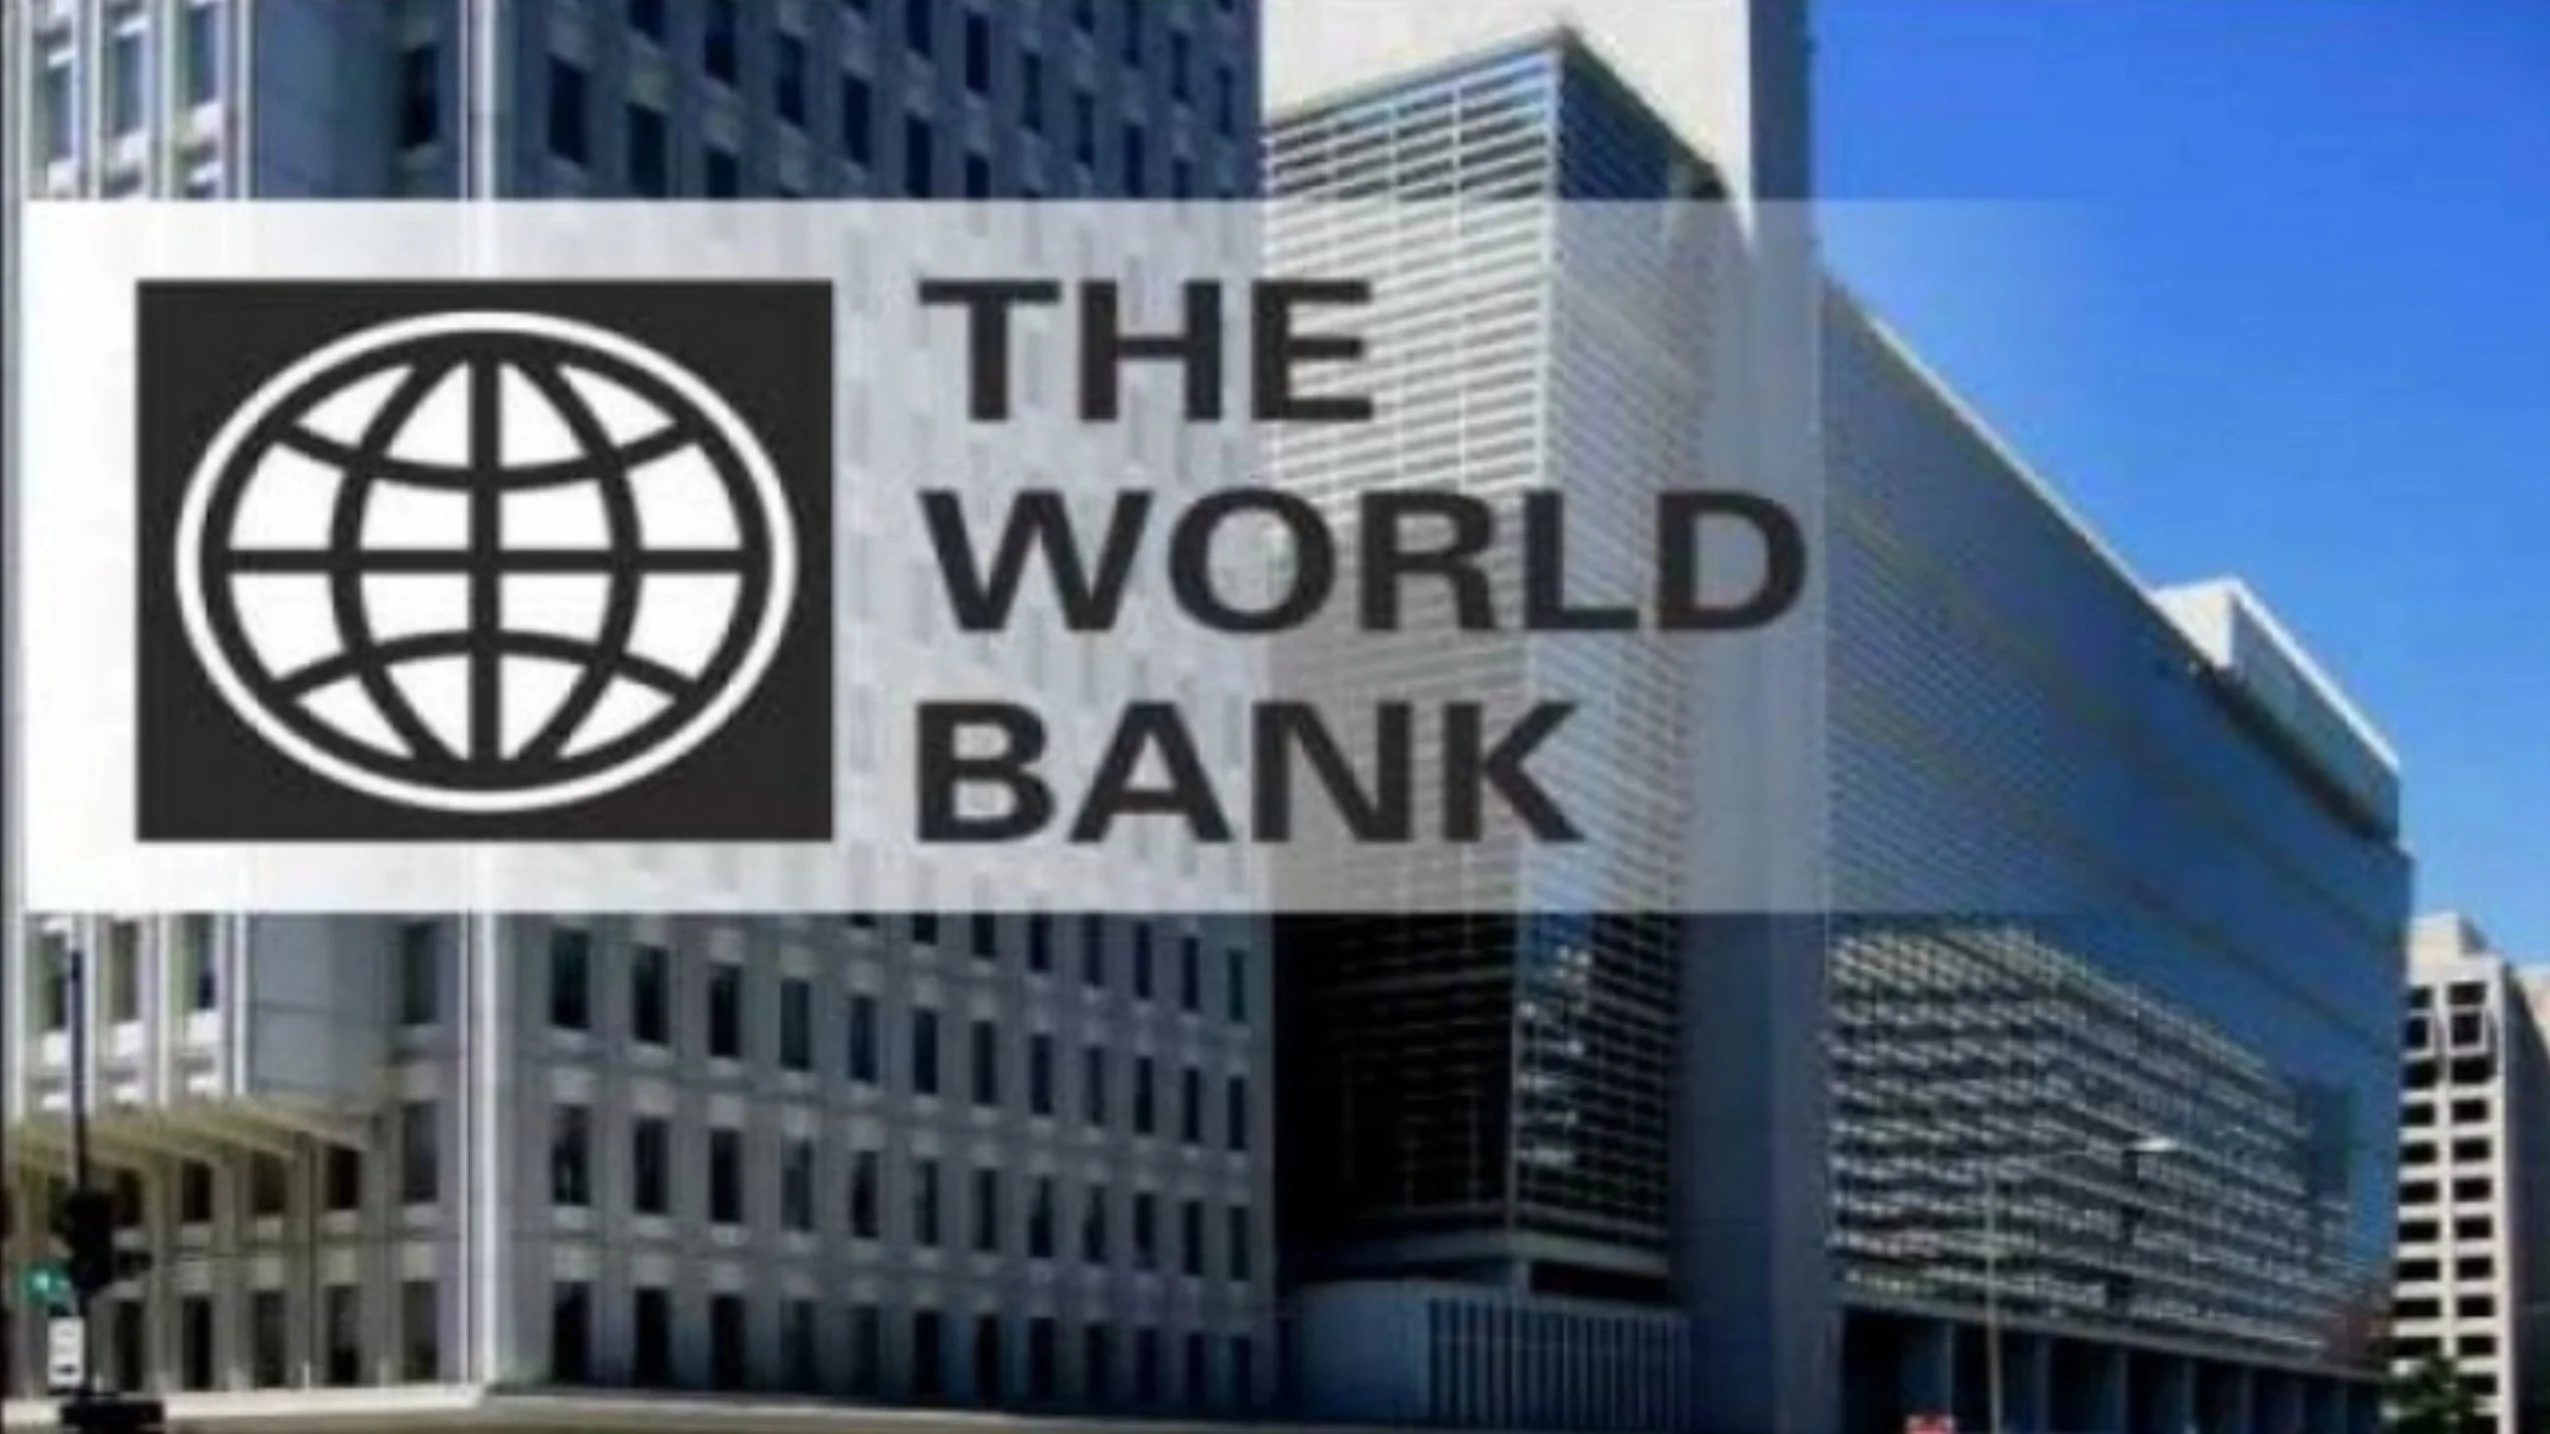 World Bank commits $70 billion to support digital infrastructure in Ghana and developing countries: Ghana News